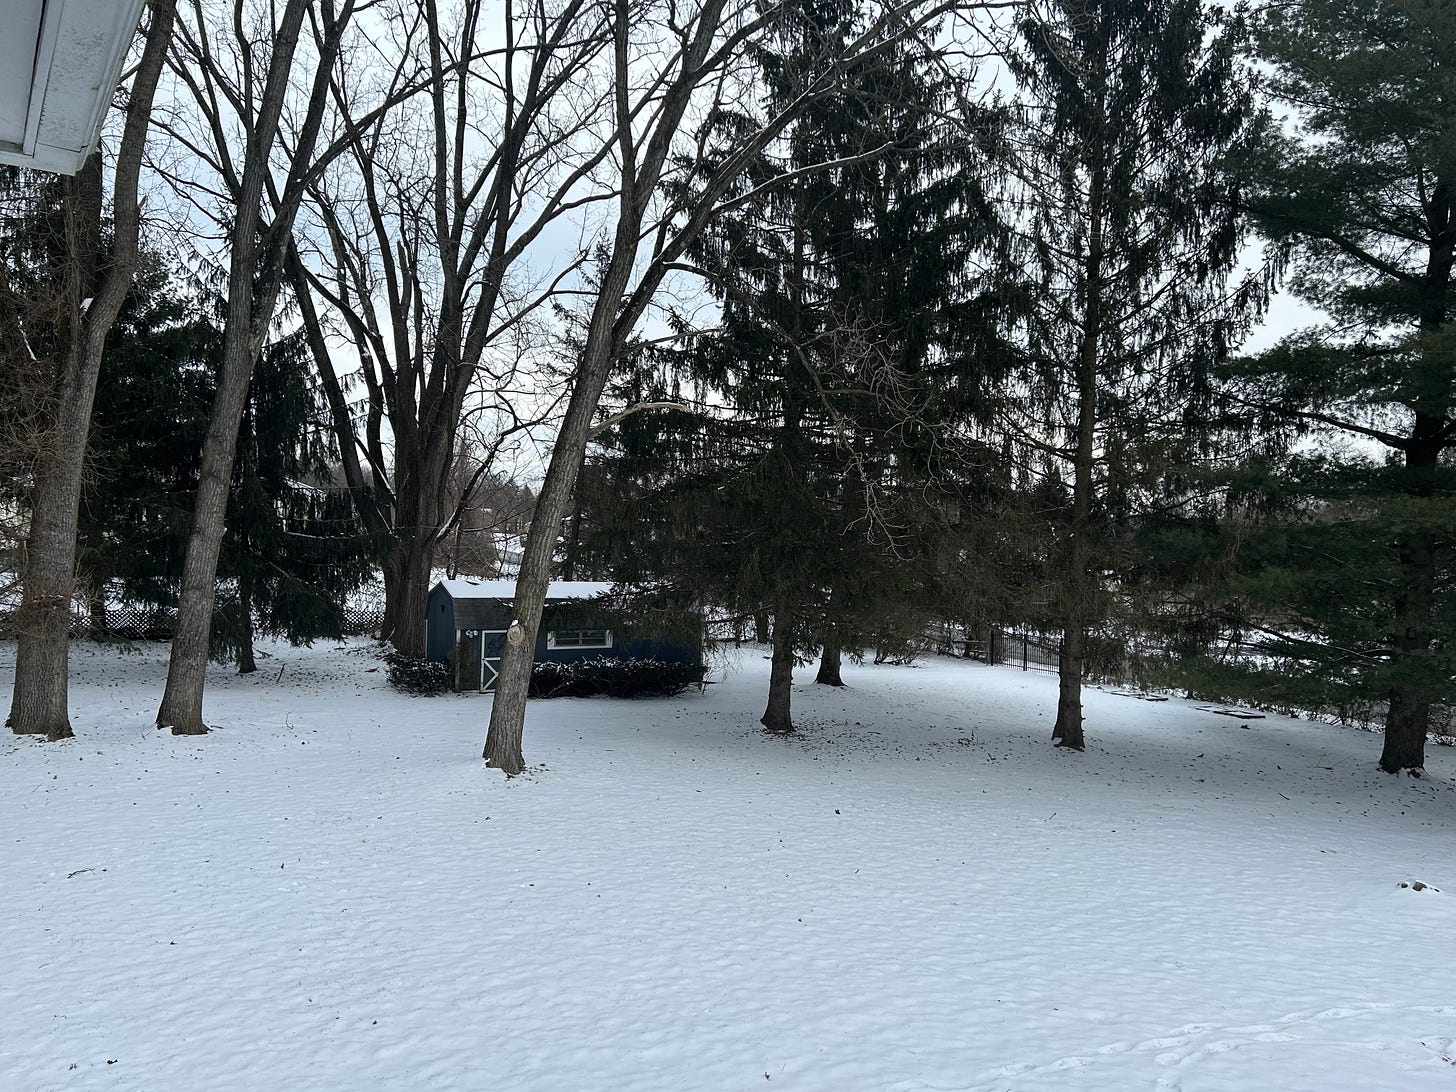 image of a backyard. Ground covered in snow. Several trees and a blue shed.